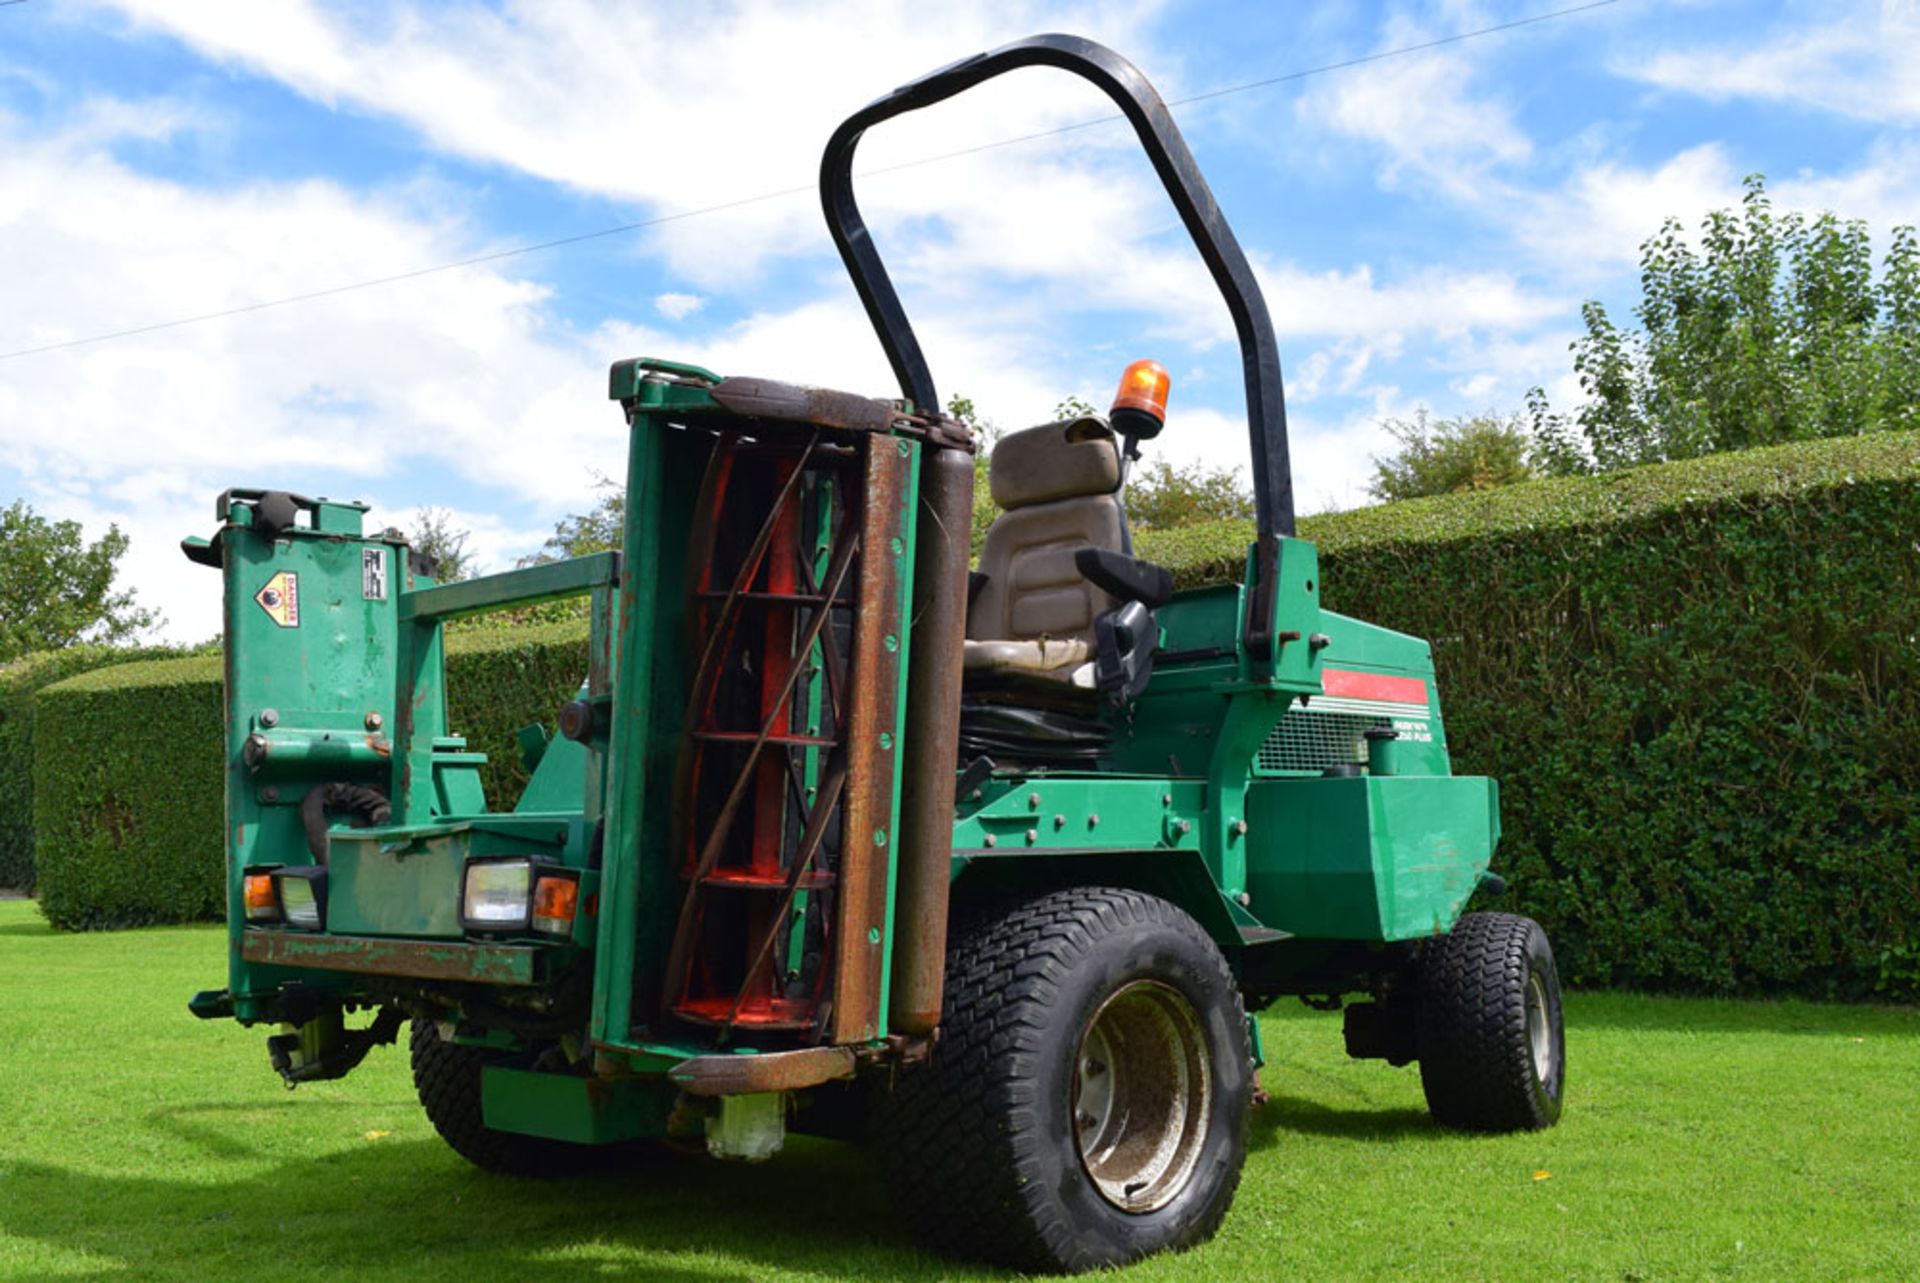 2003 Ransomes Parkway 2250 Plus Ride On Cylinder Mower - Image 4 of 8